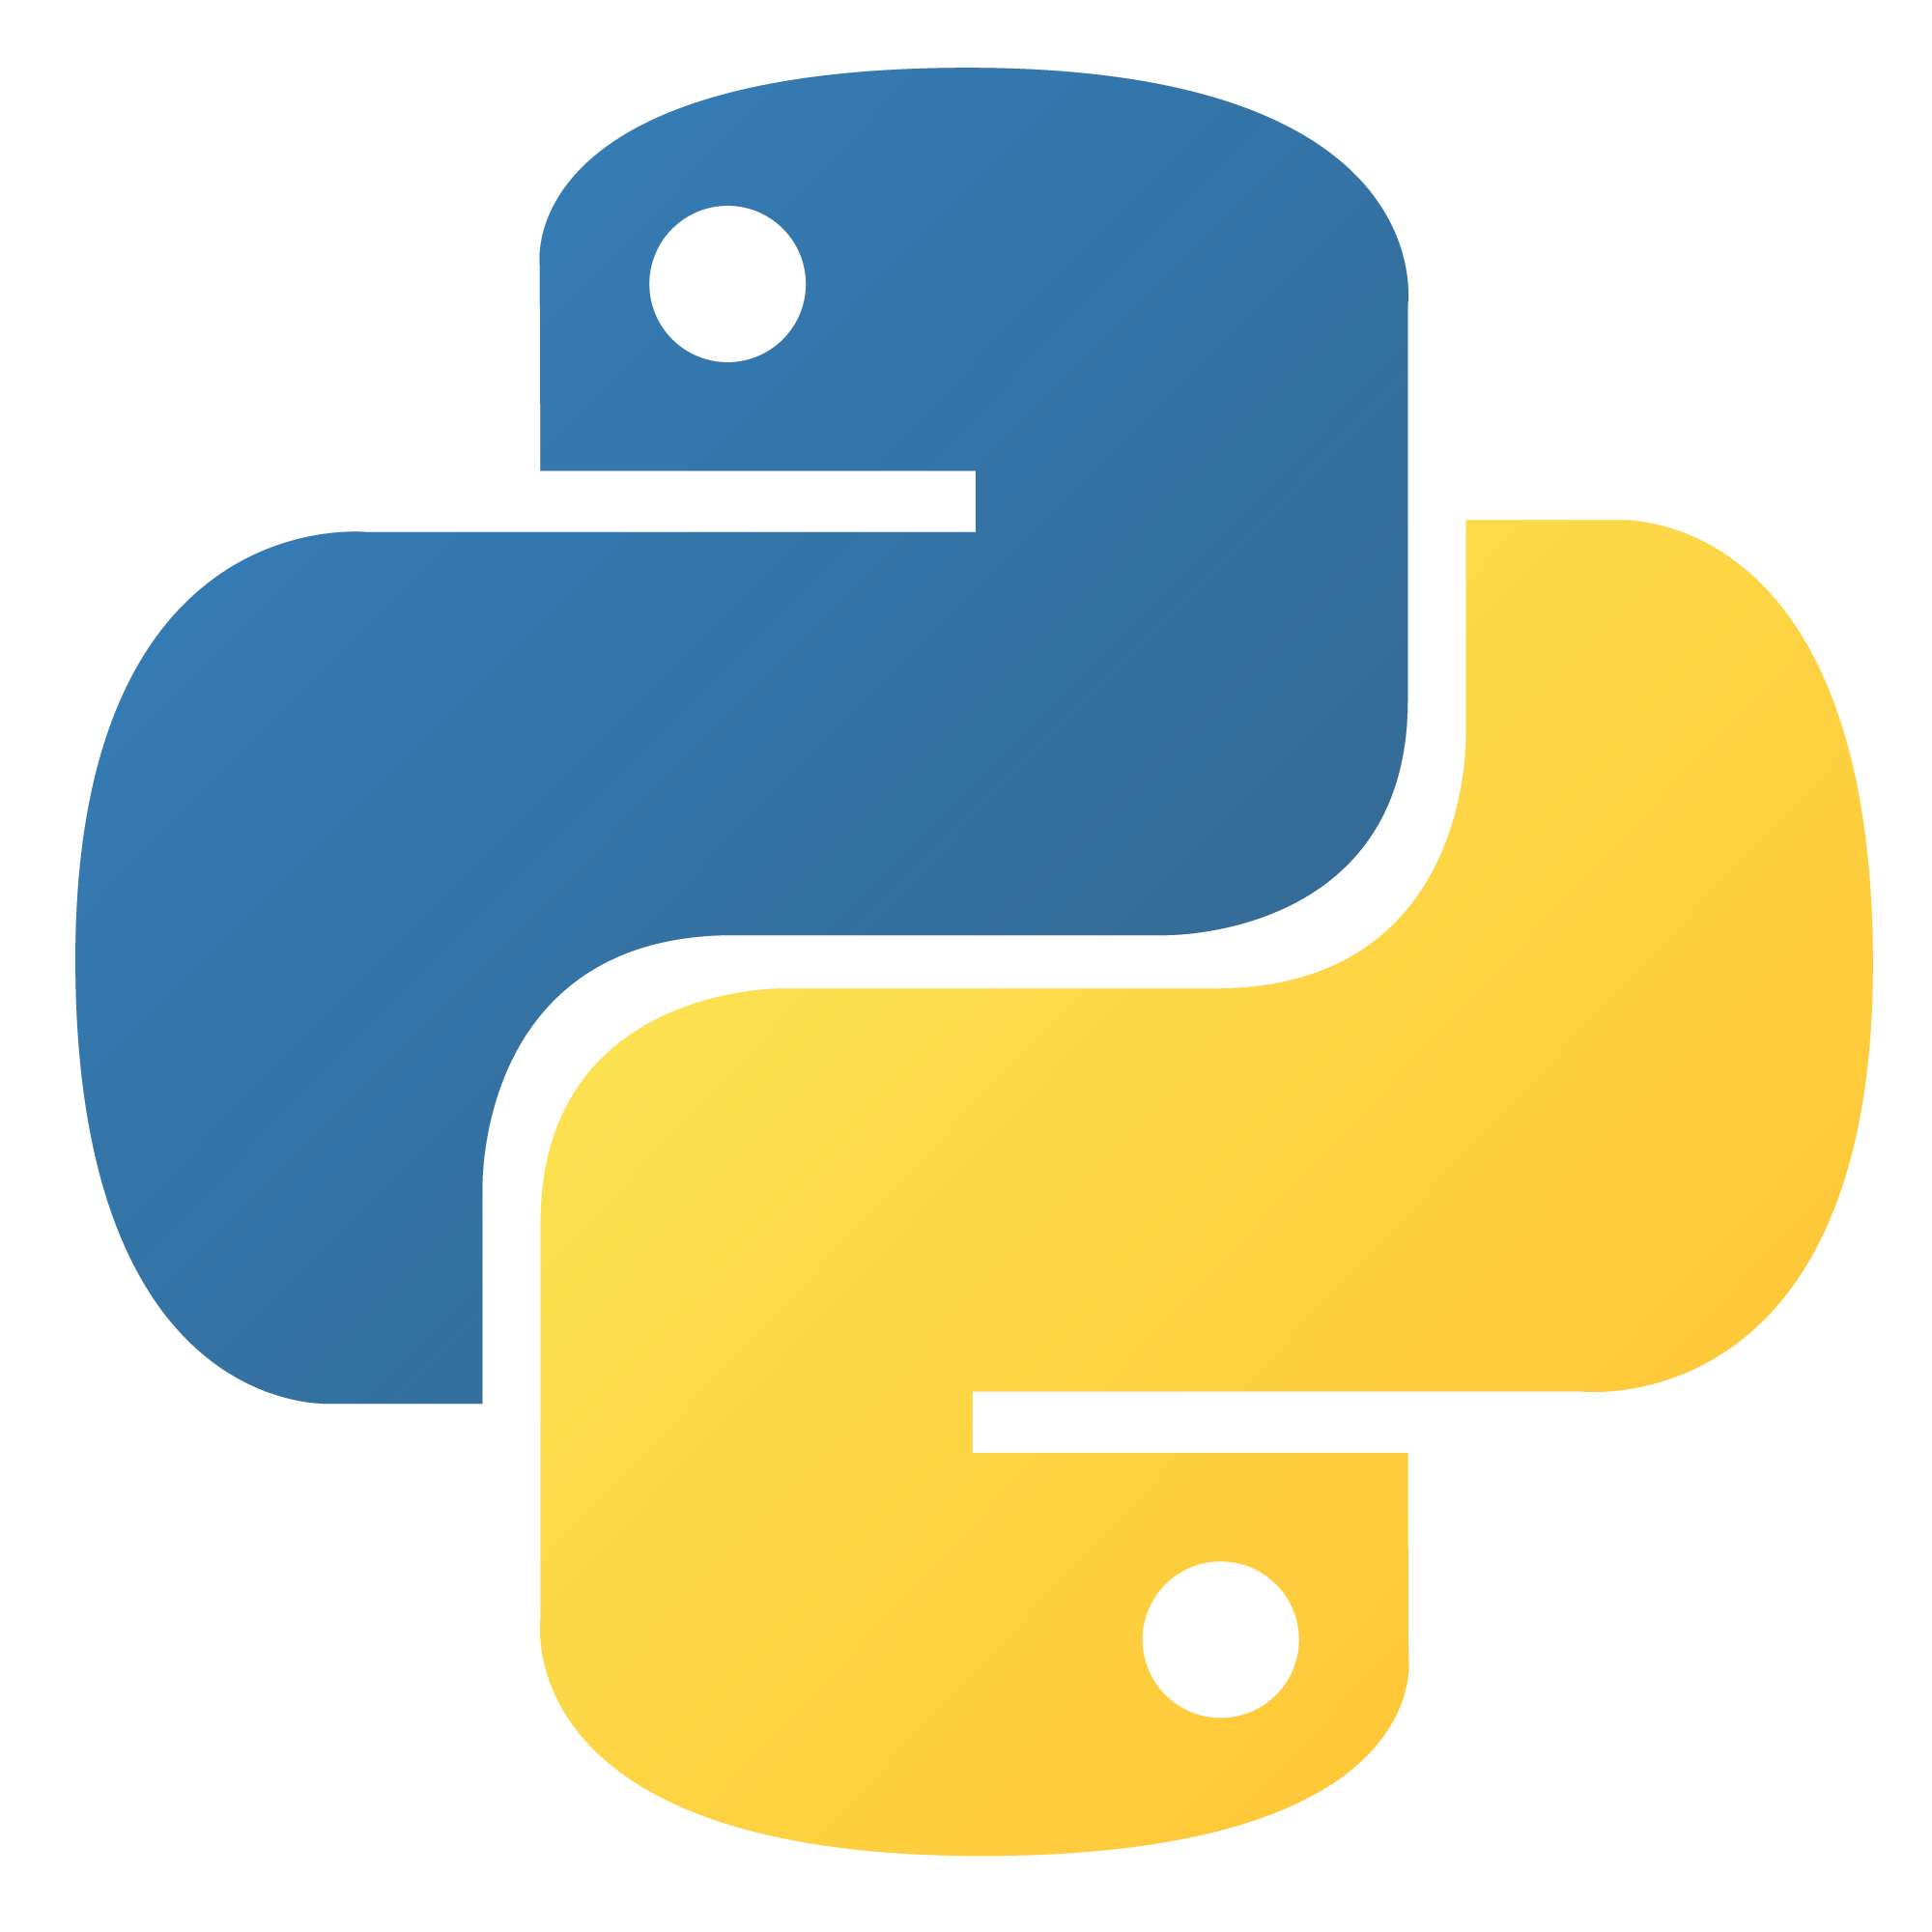 code examples and answer to questions in Python programming luaguage